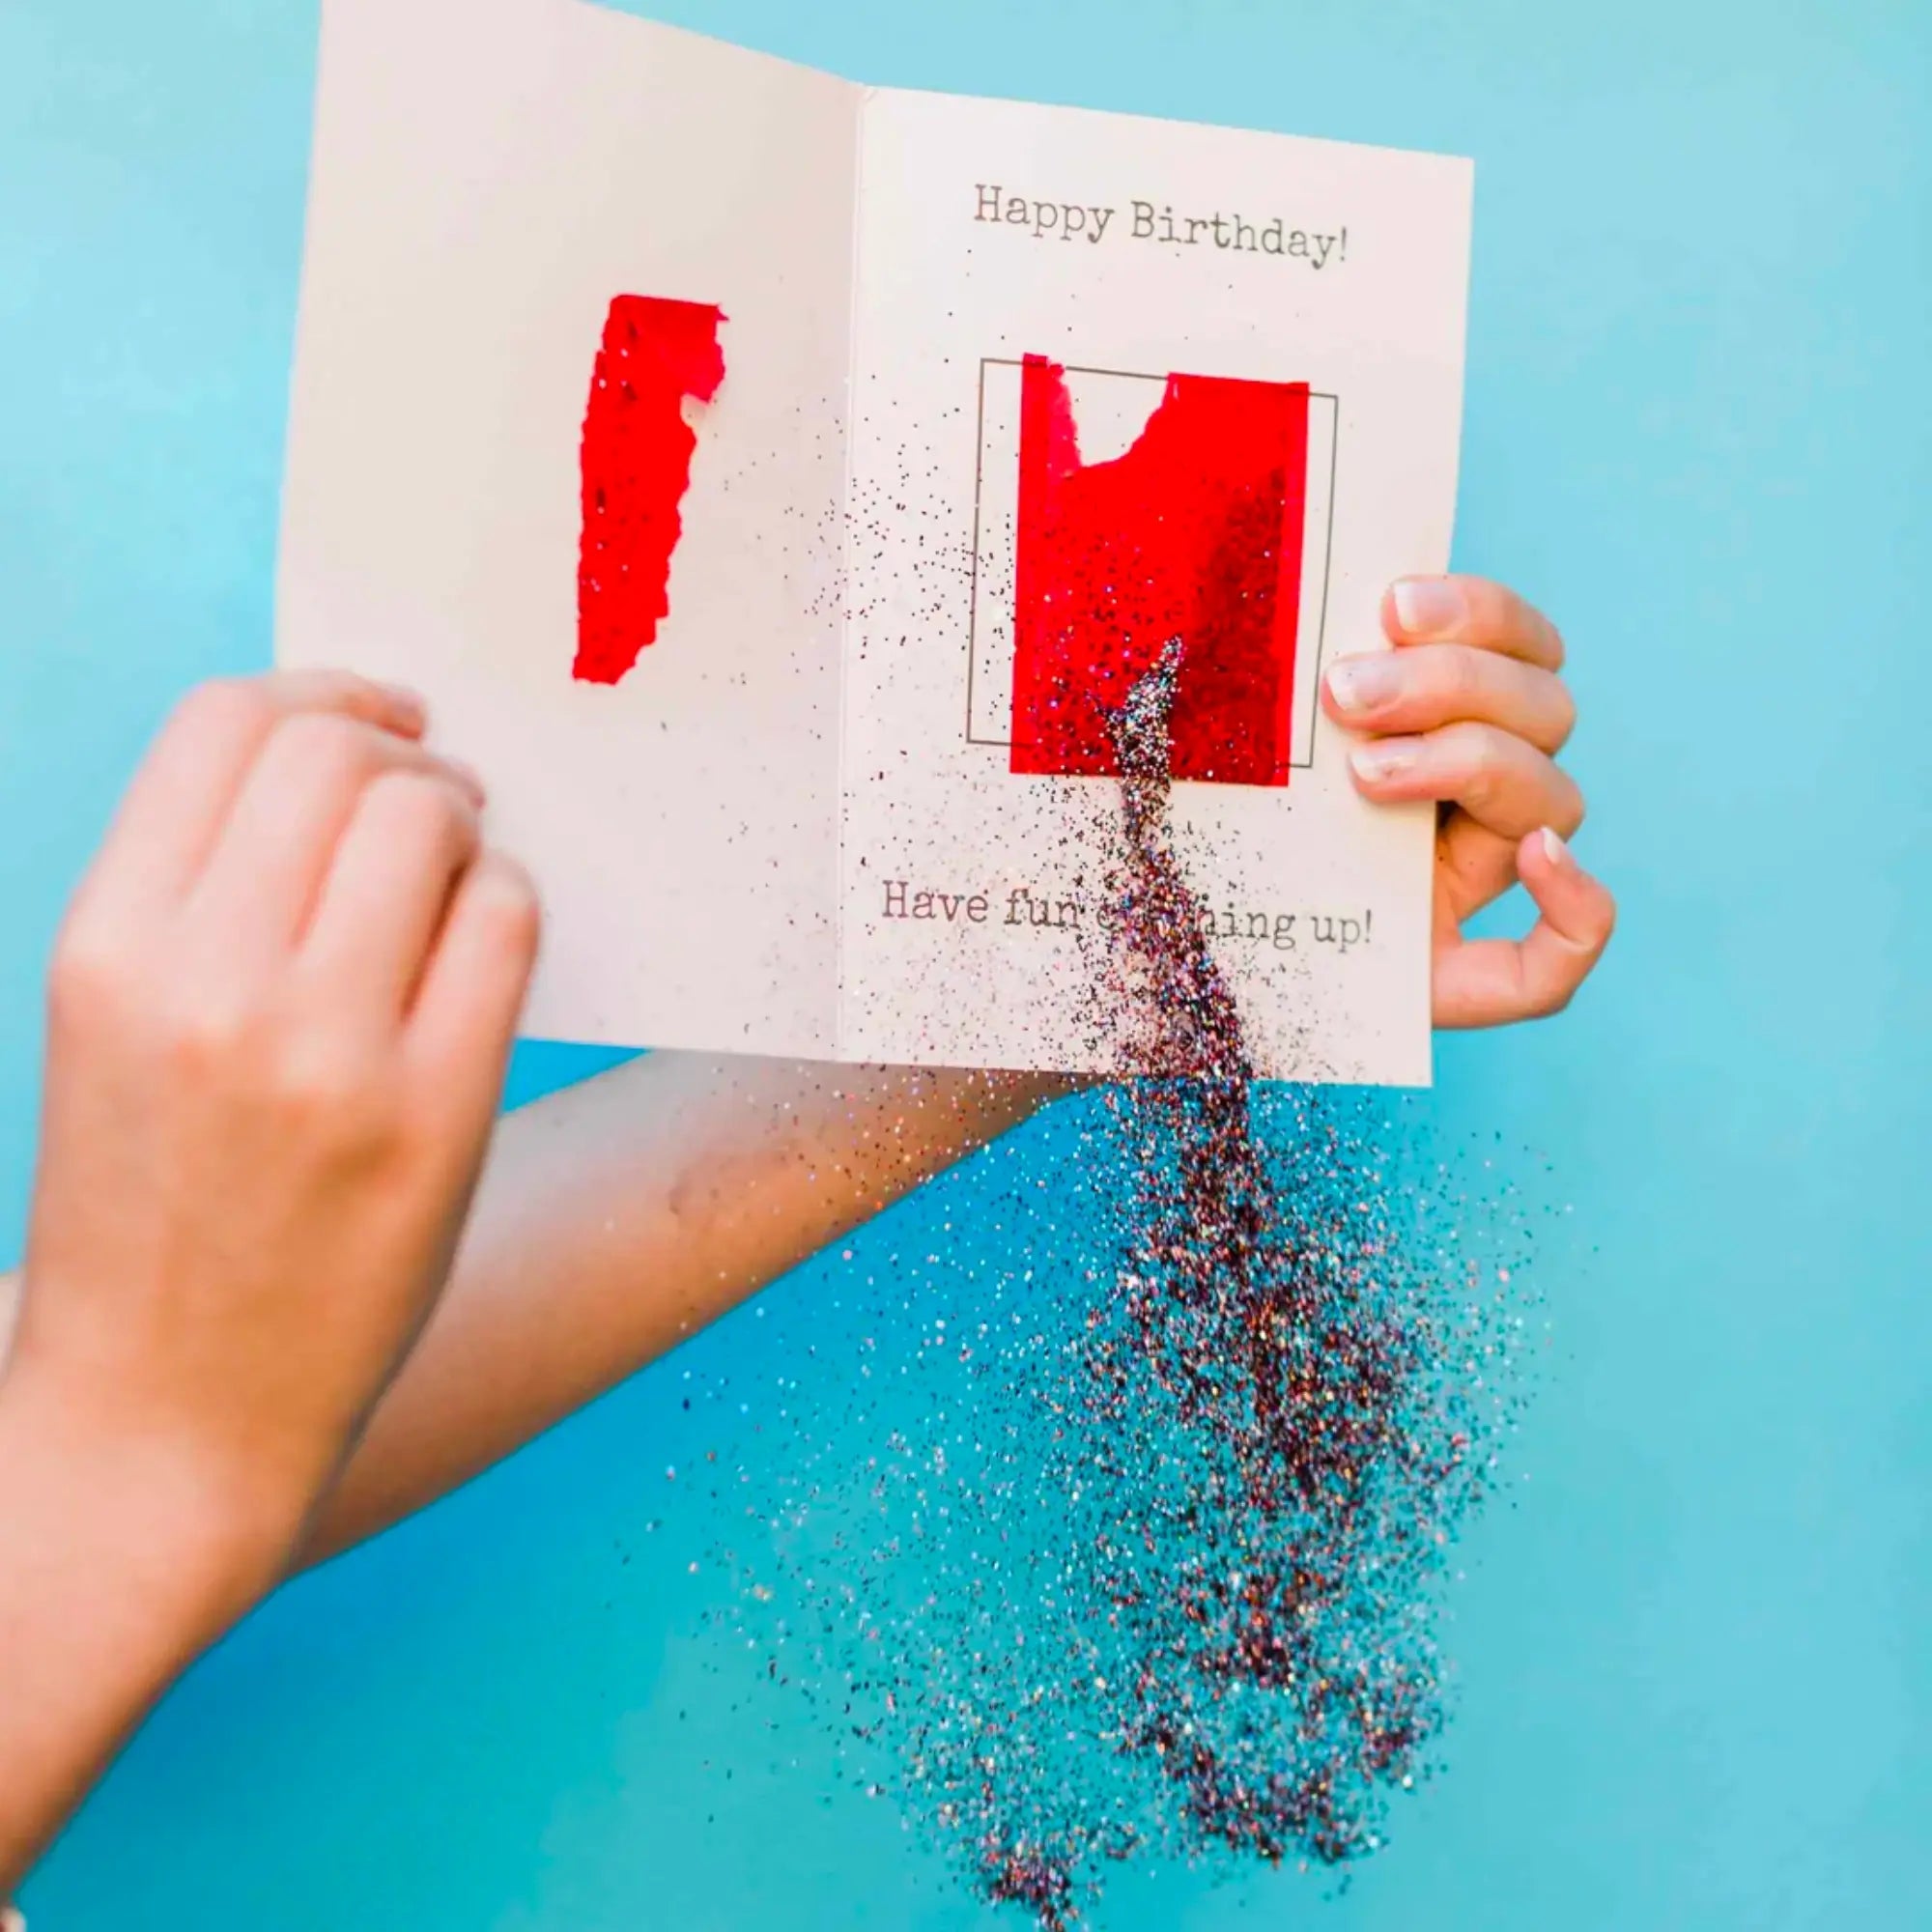 Glitter Bomb Cards Pranks Anonymous send hilarious pranks and gag gifts to your friends or family.